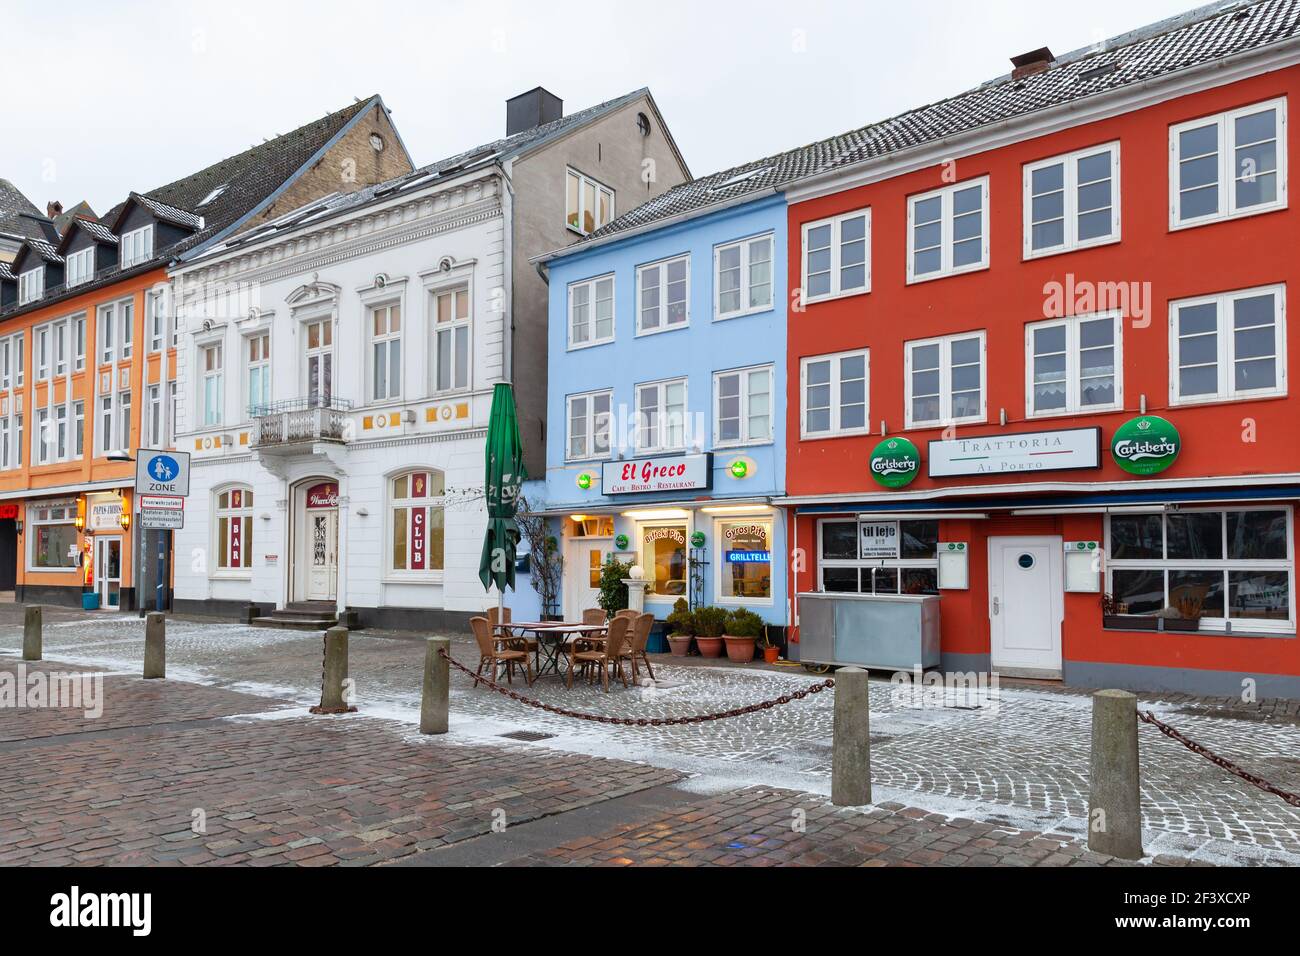 Flensburg, Germany - February 8, 2017: Street view with traditional colorful living houses in old town of Flensburg Stock Photo